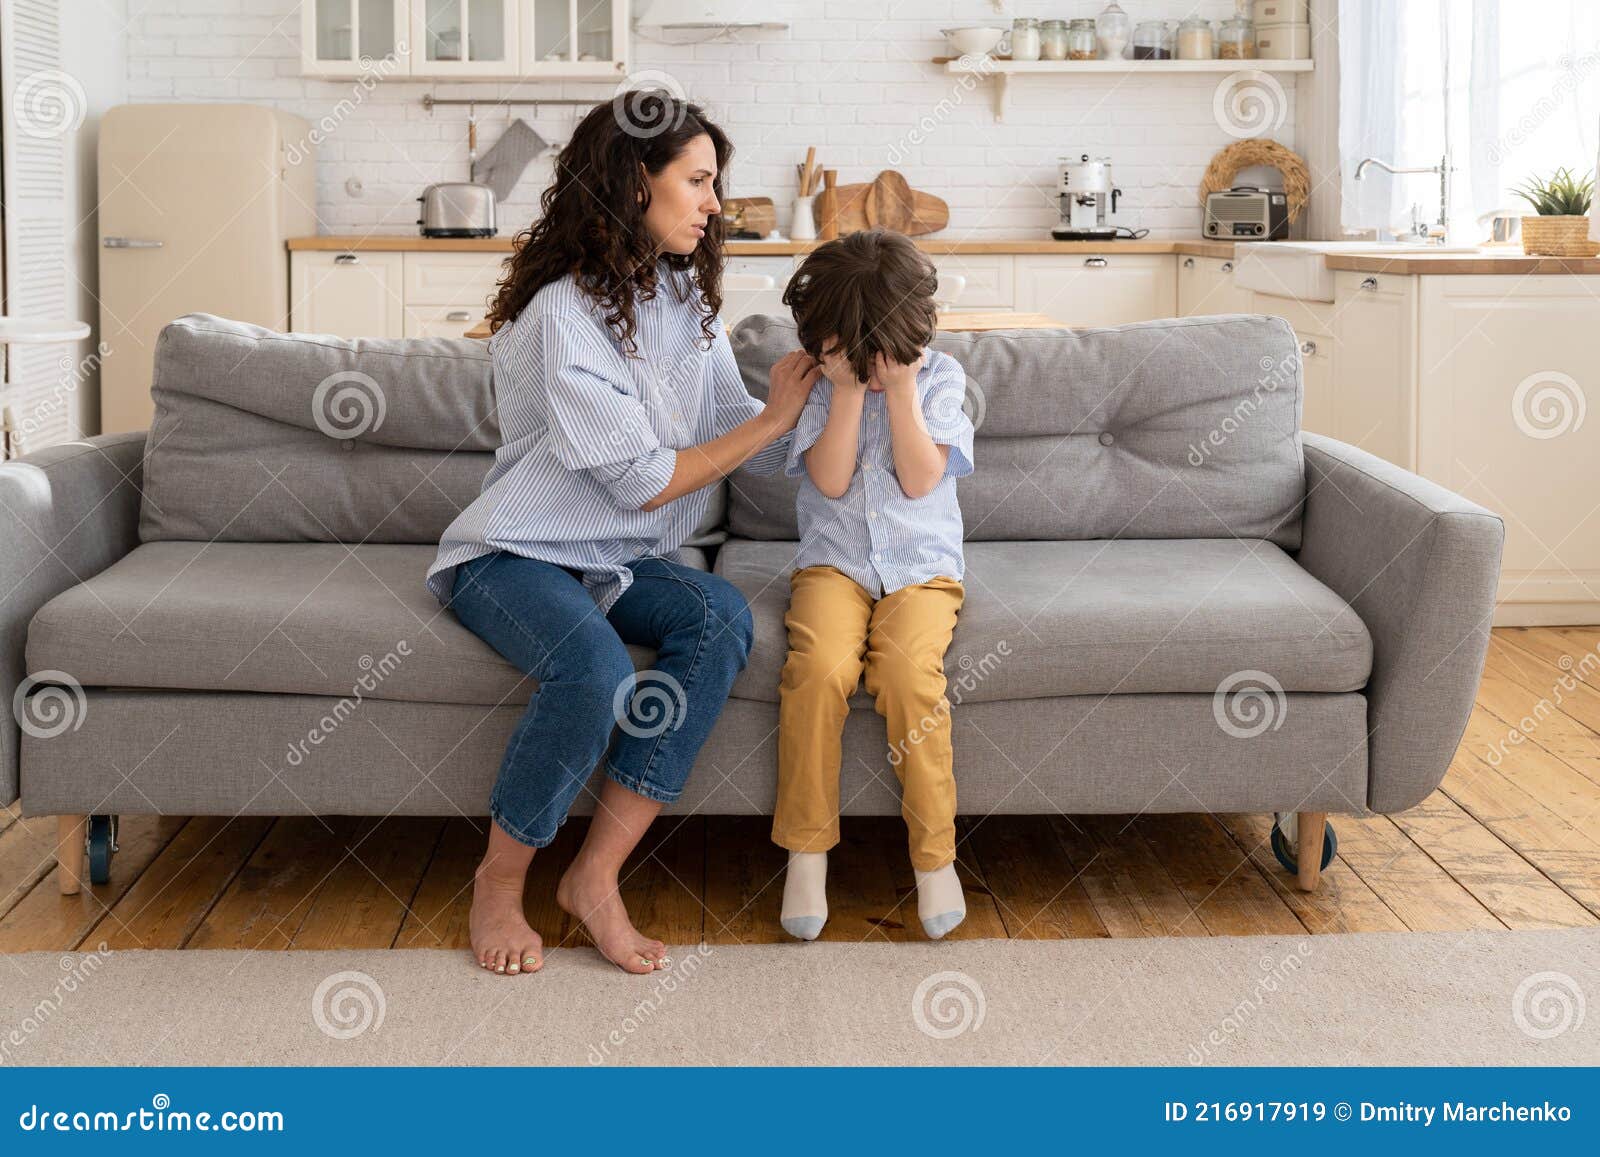 mother trying to distract upset kid. young mom engaging depressed offended son in bad mood by hug